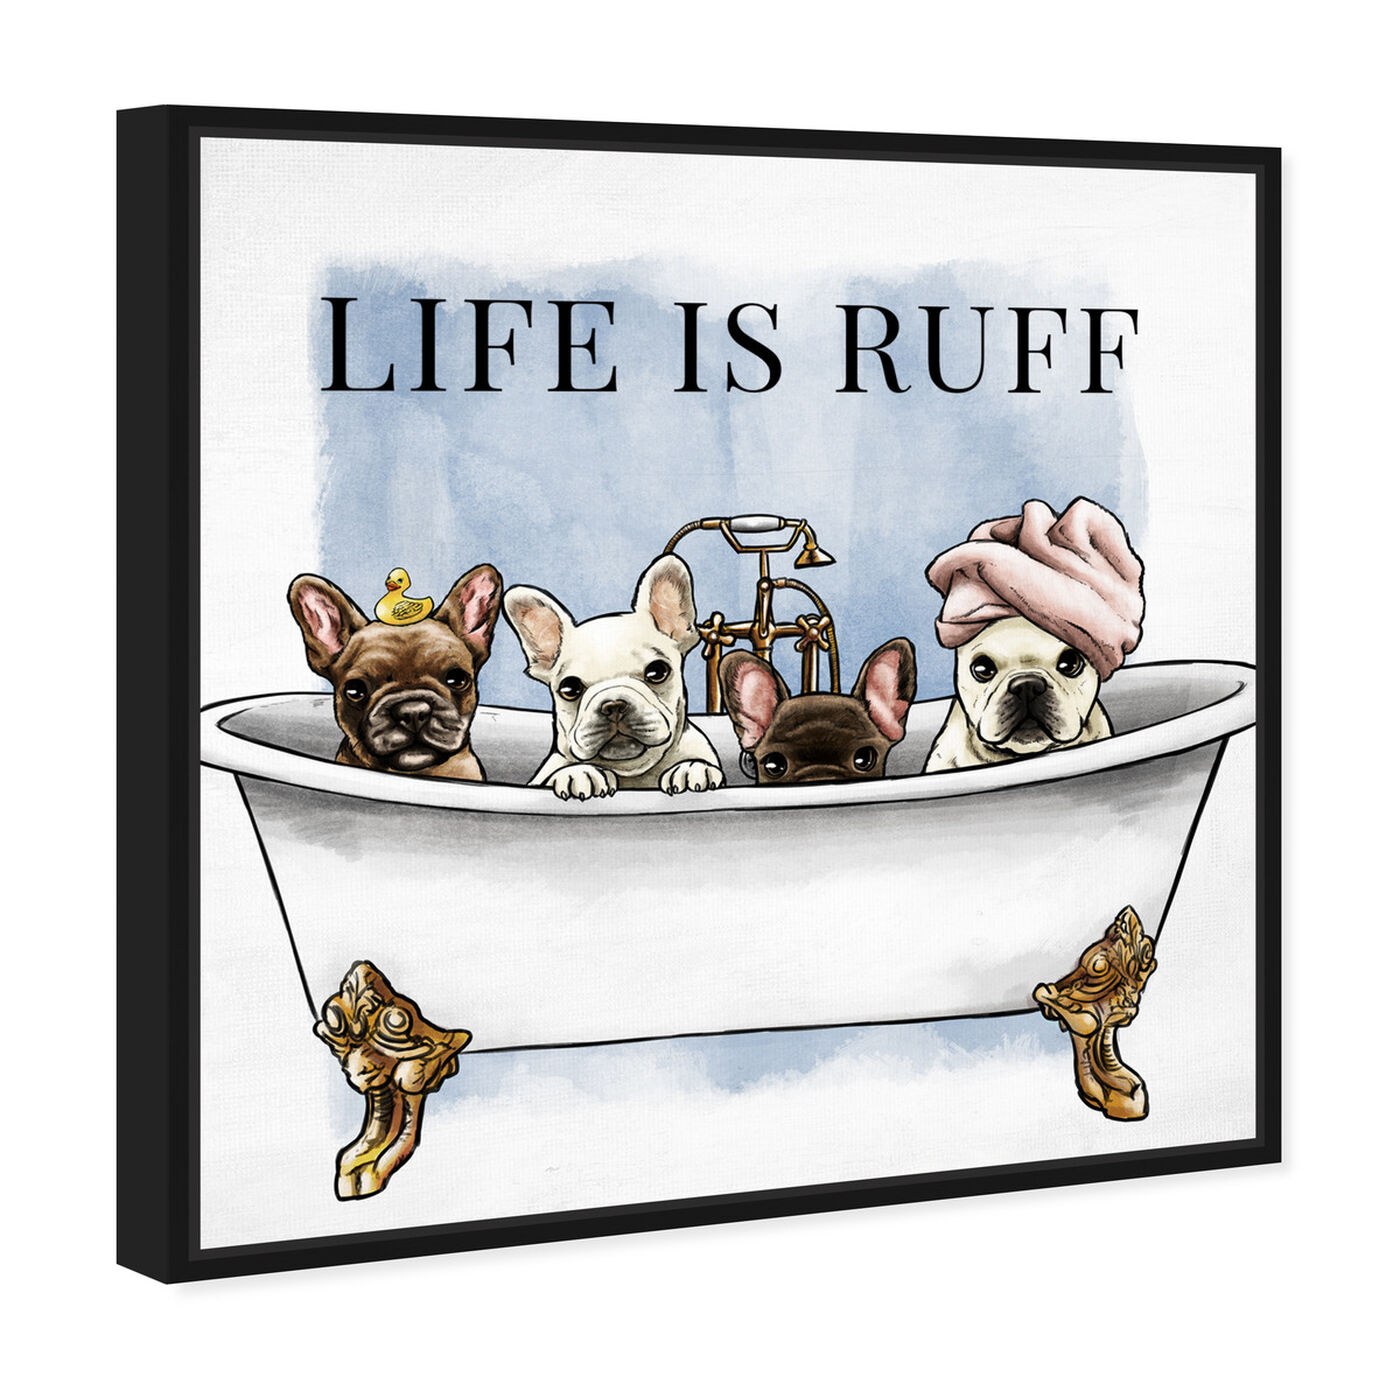 Angled view of Life is Ruff featuring bath and laundry and bathtubs art.